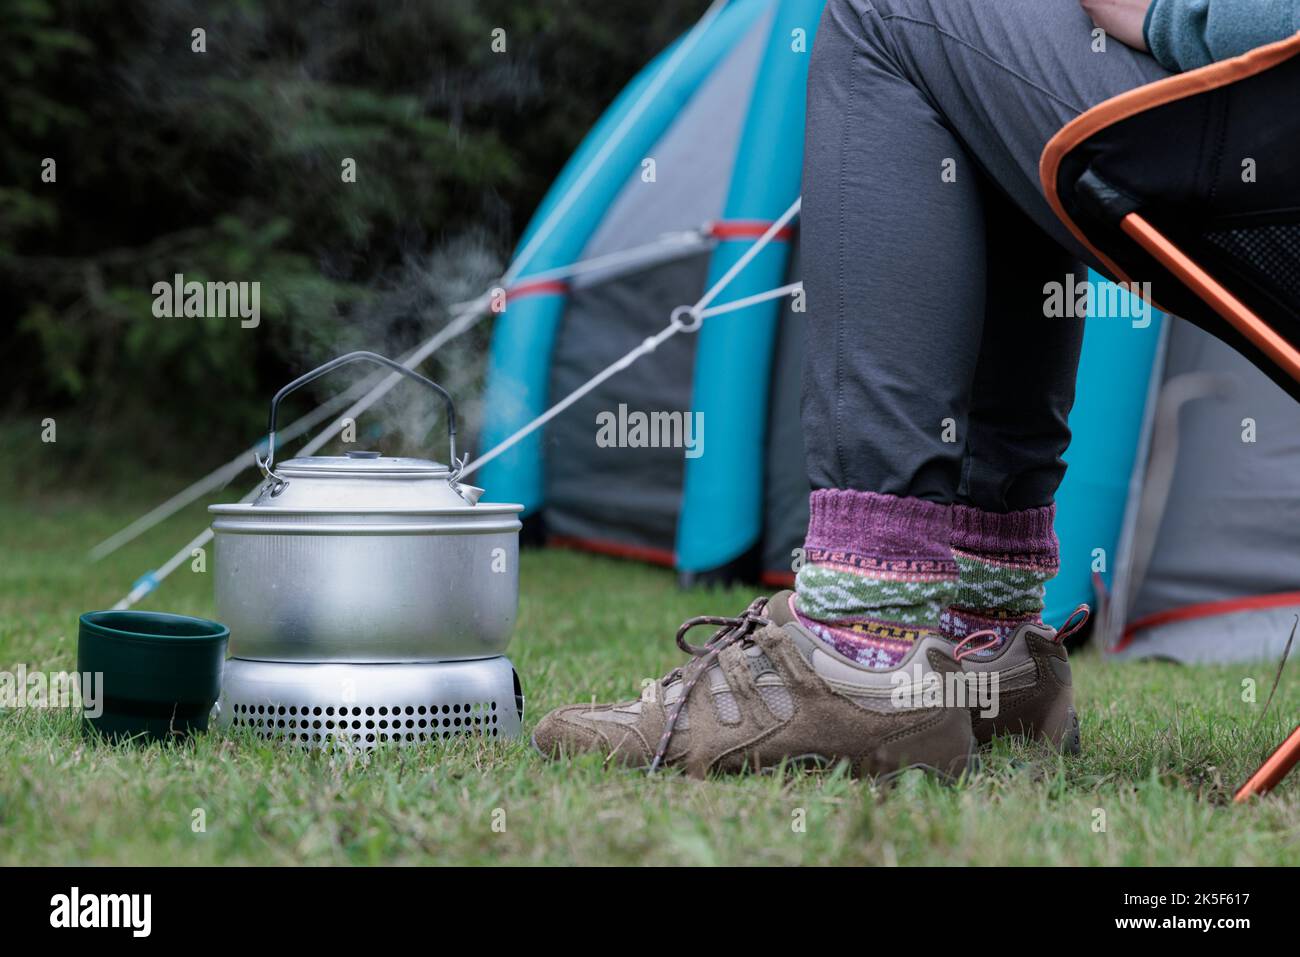 Woman boiling a kettle on a camping stove. Stock Photo